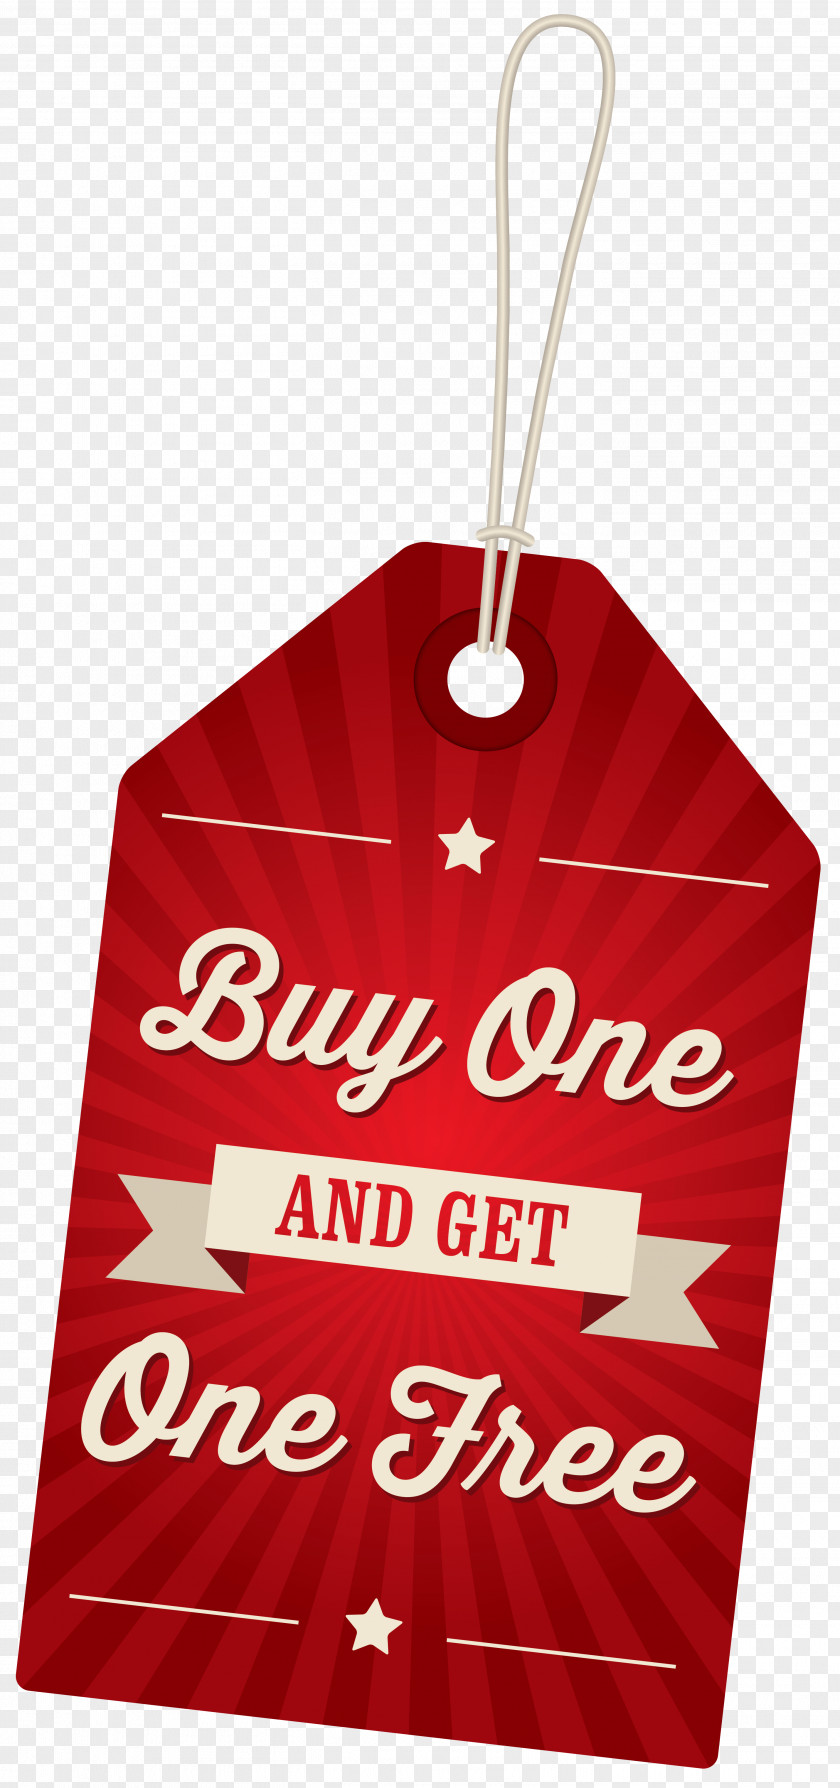 Buy One Get Free Label Clipart Image One, Buffet Clothing Icon PNG